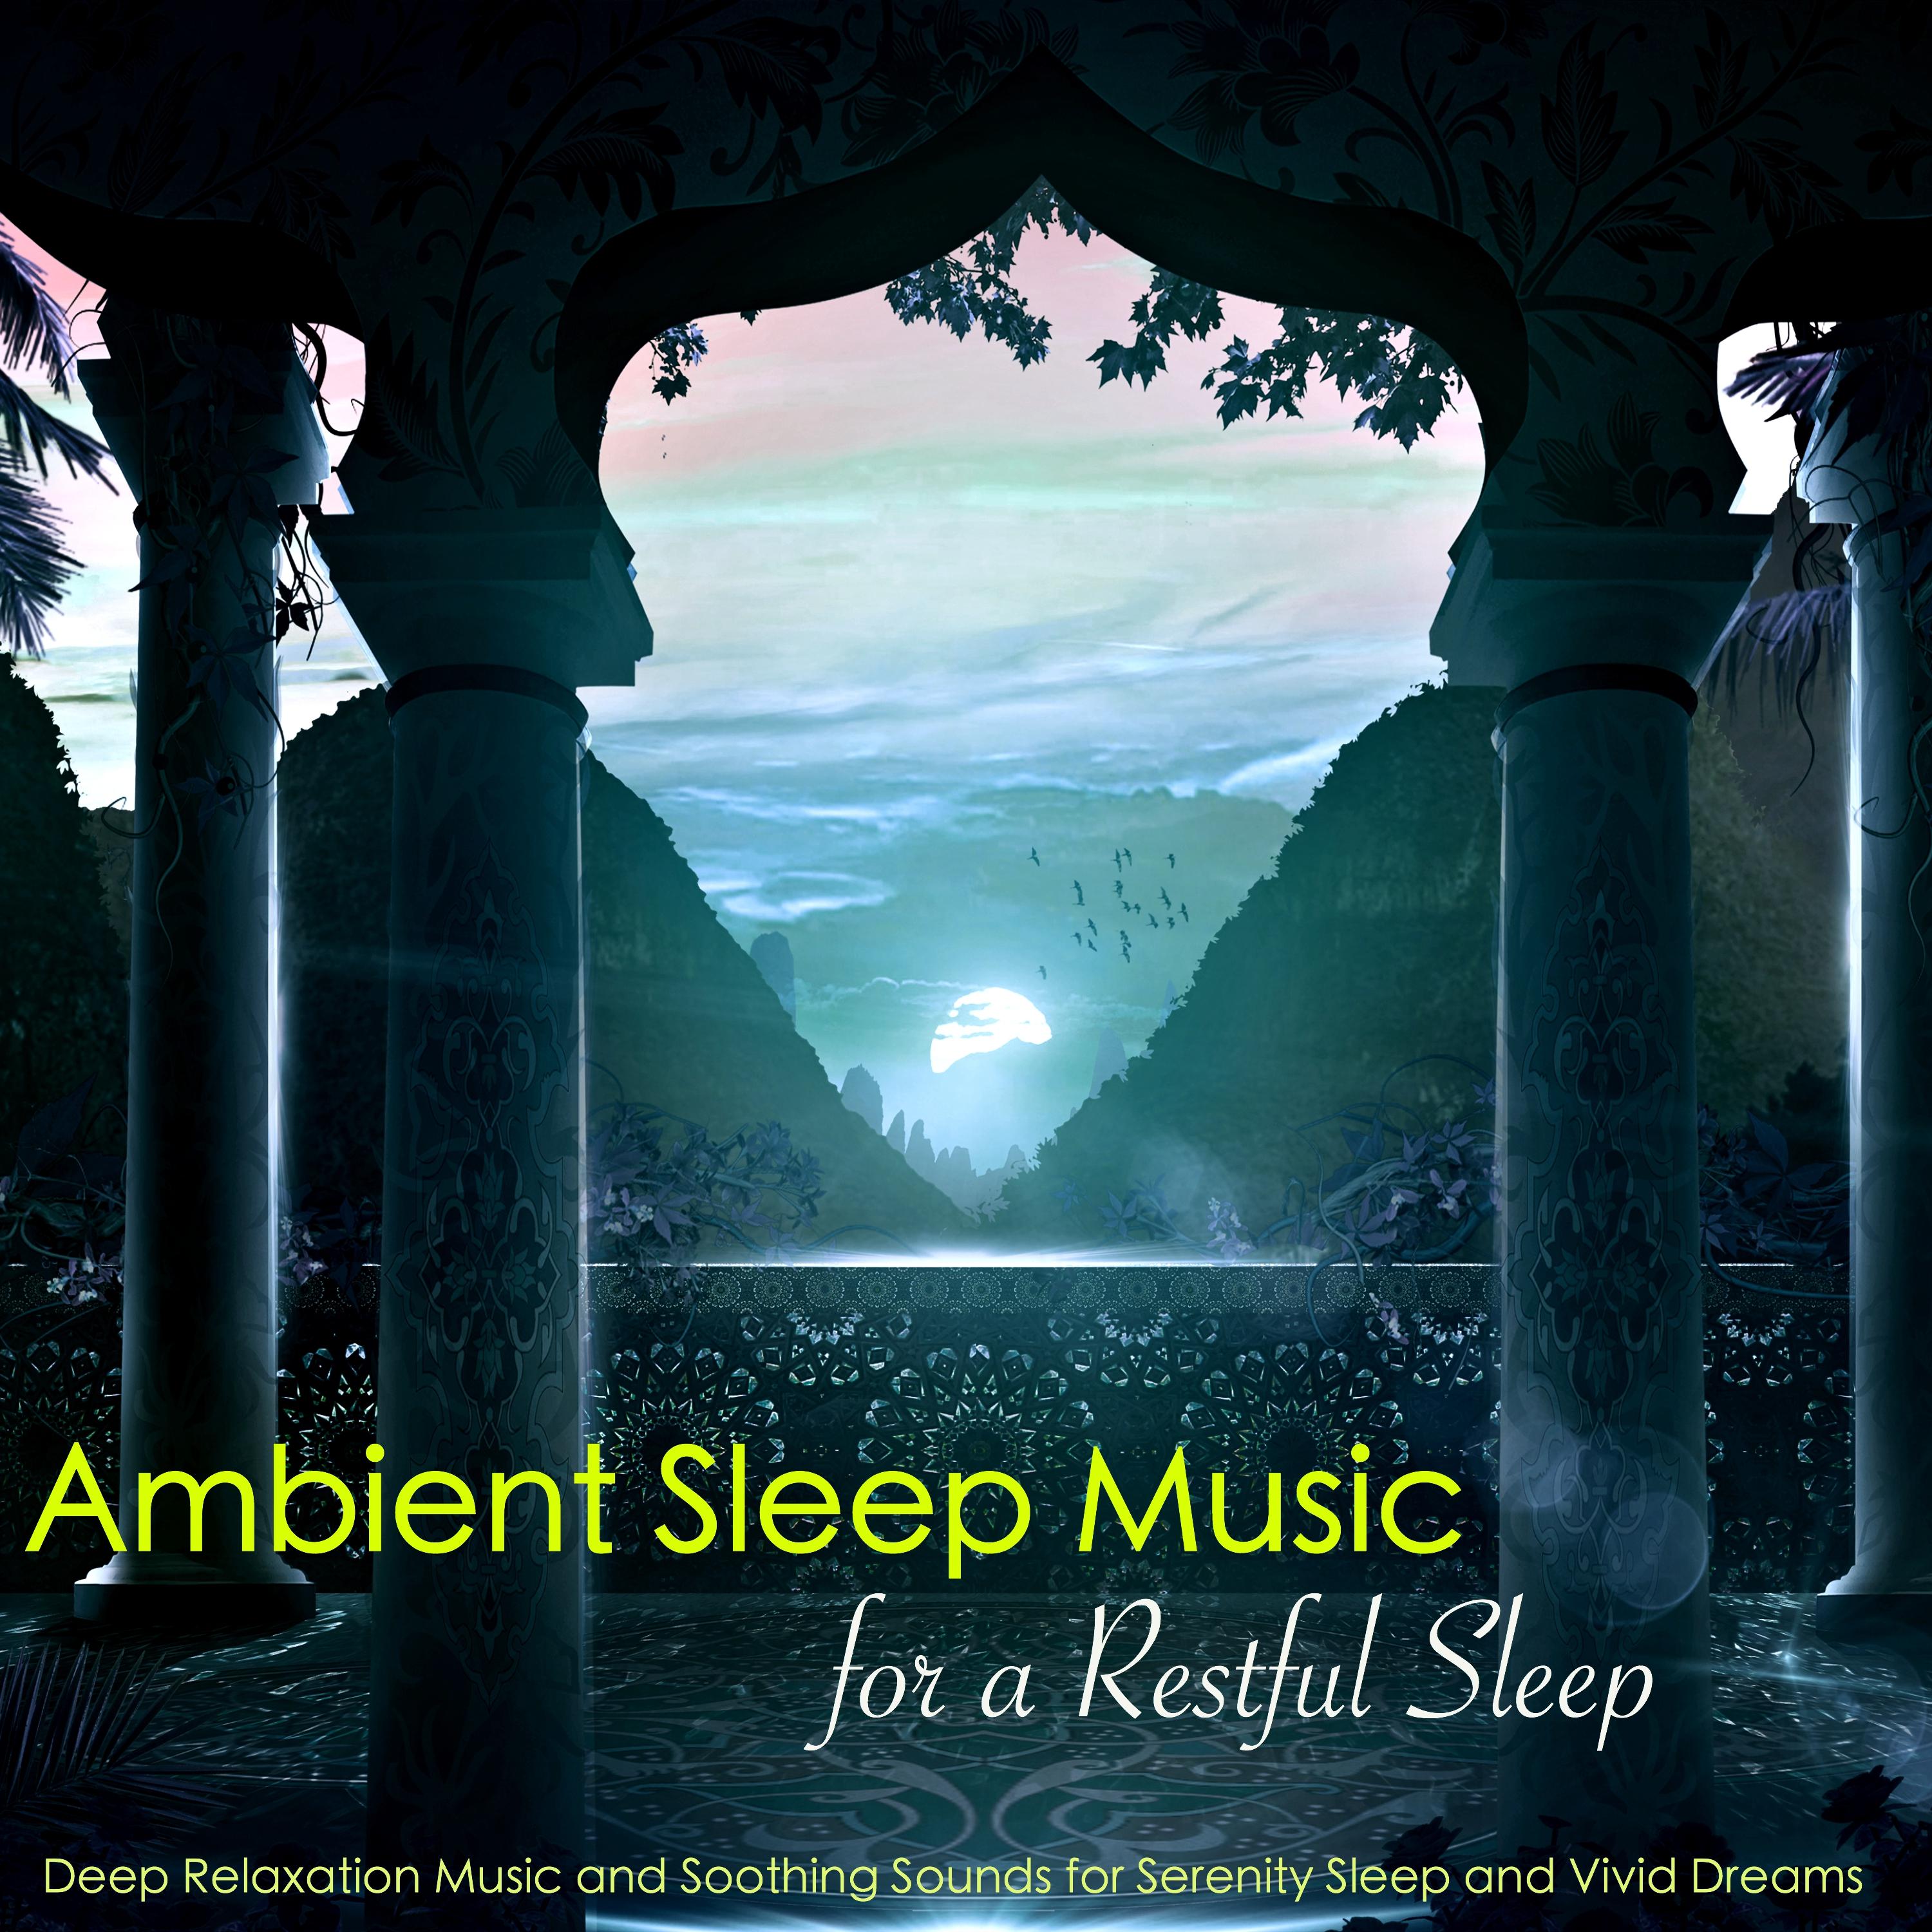 Ambient Sleep Music for a Restful Sleep – Deep Relaxation Music and Soothing Sounds for Serenity Sleep and Vivid Dreams